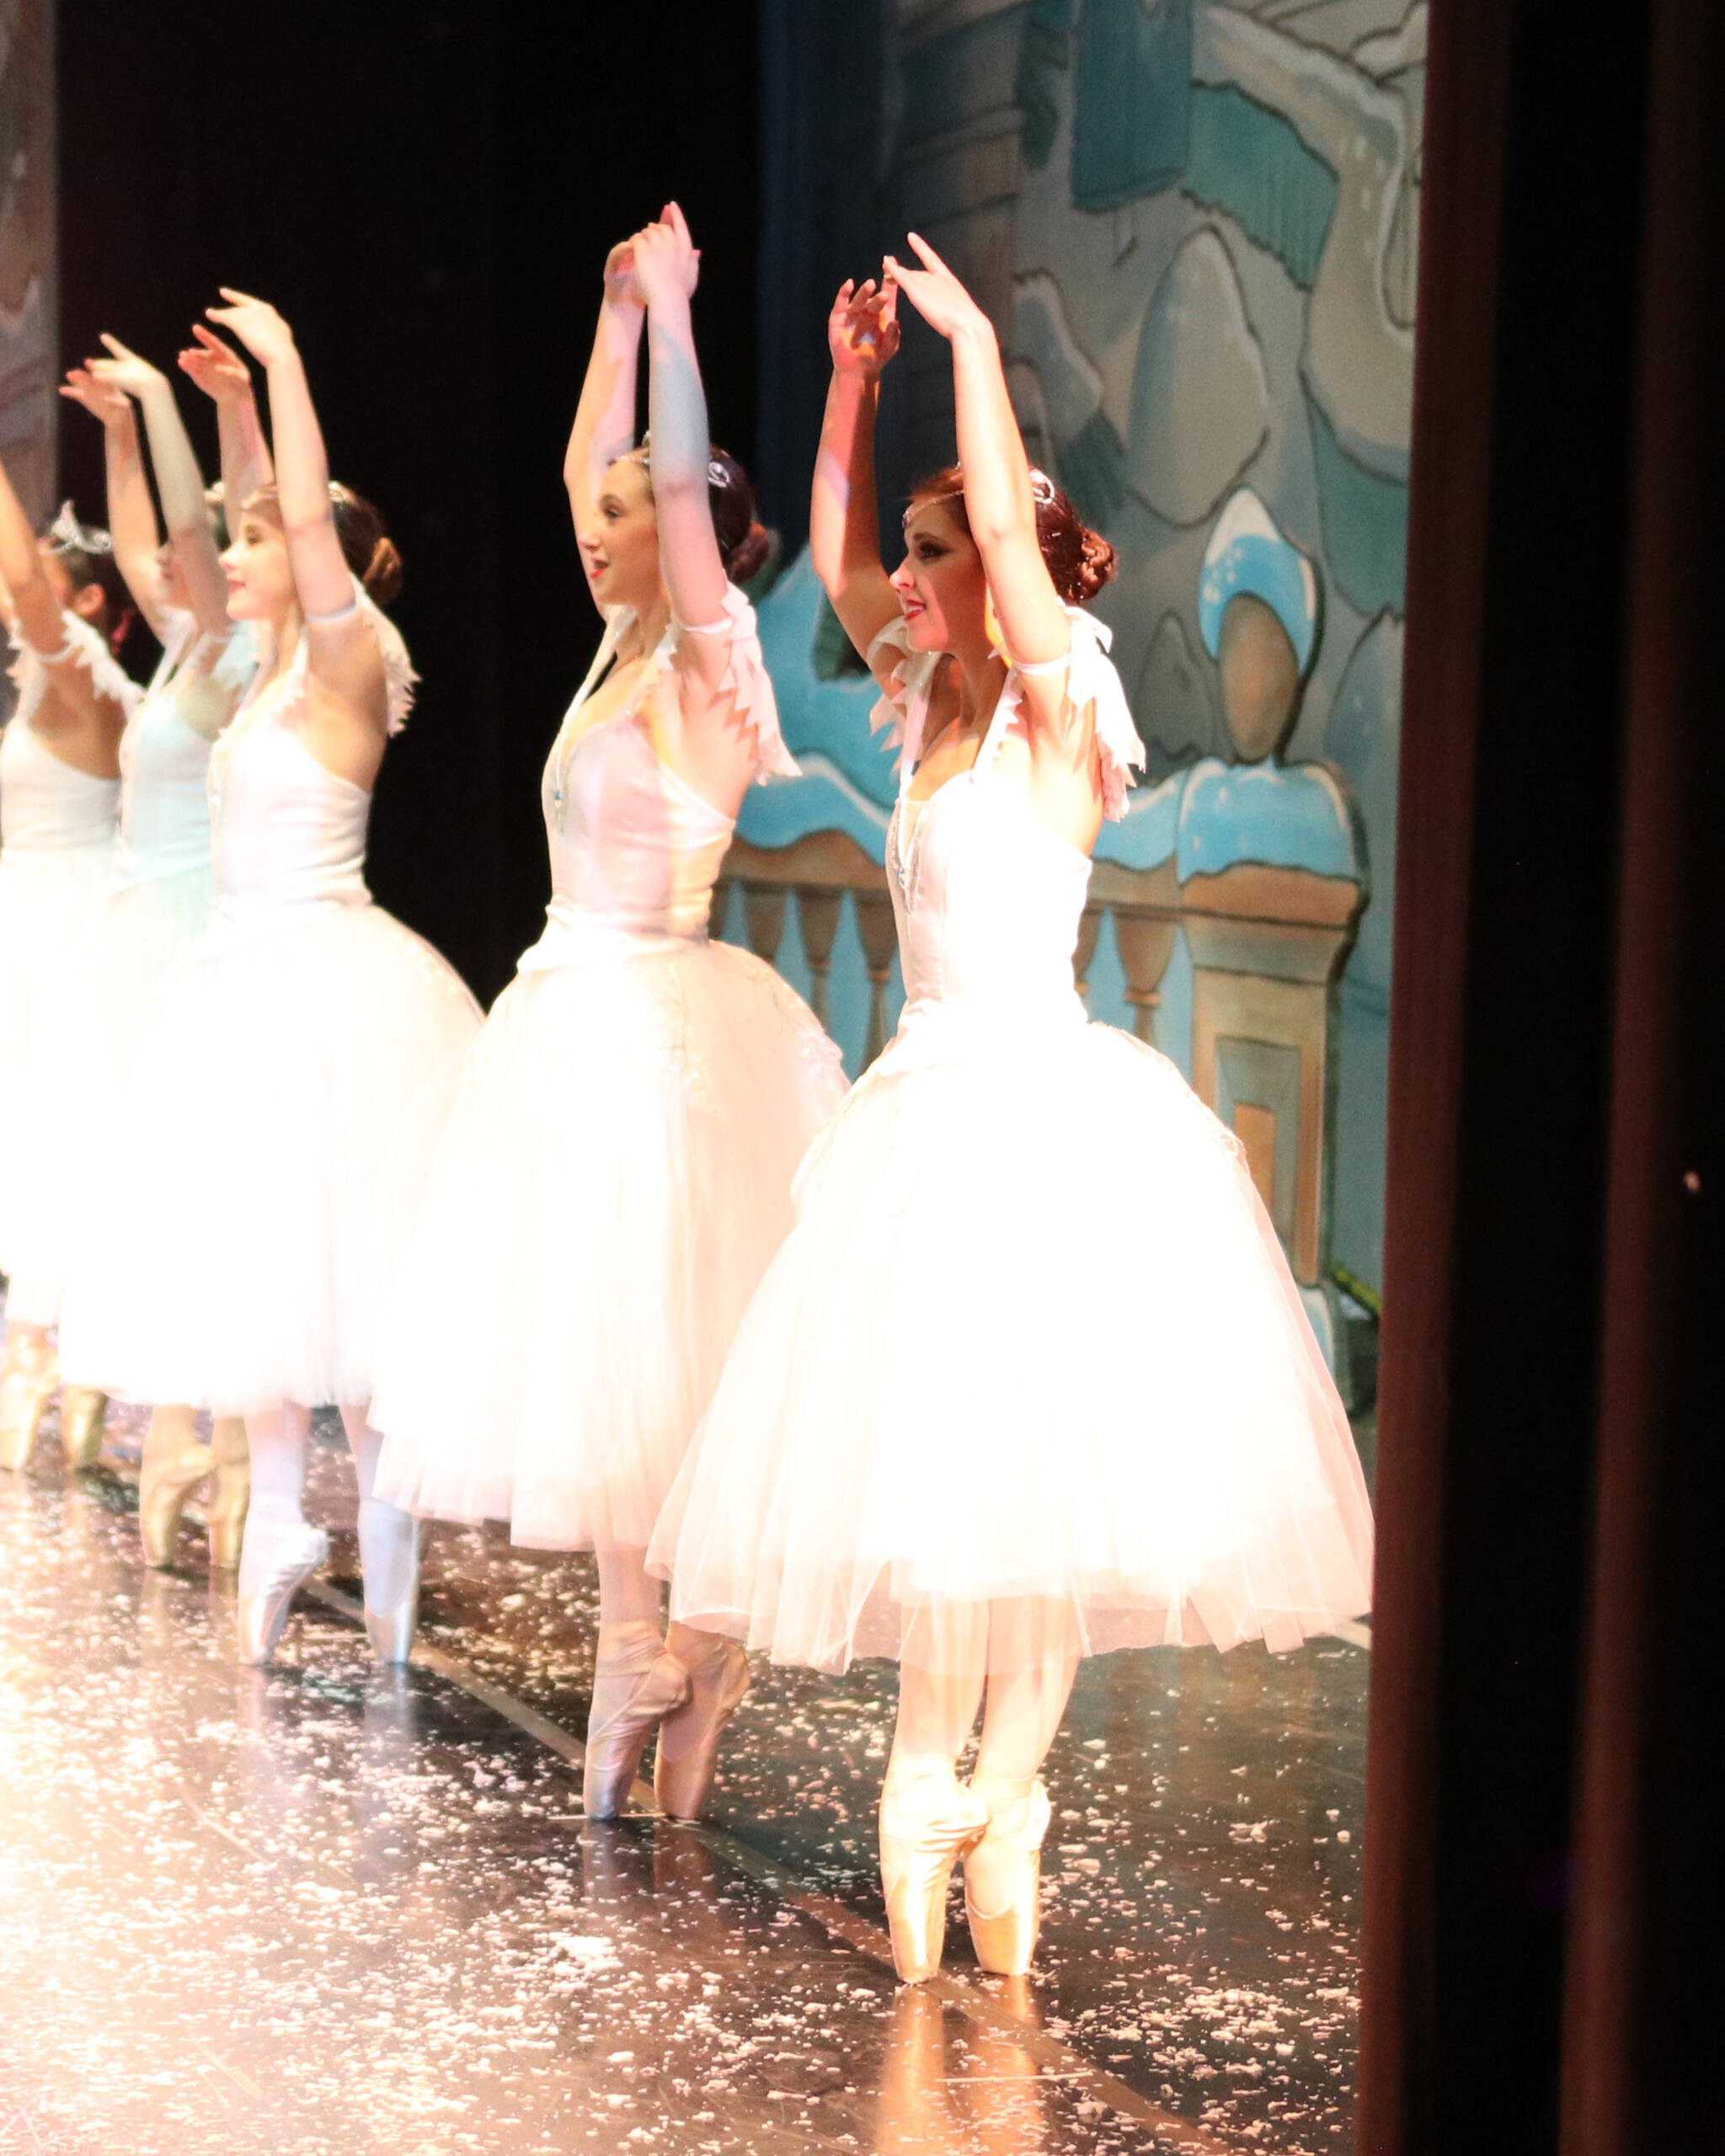 Sara DeVolld performs as part of the Snow Corps in “The Nutcracker” with Eugene Ballet at the Alaska Center for the Performing Arts in Anchorage, Alaska. (Photo courtesy Shona DeVolld)